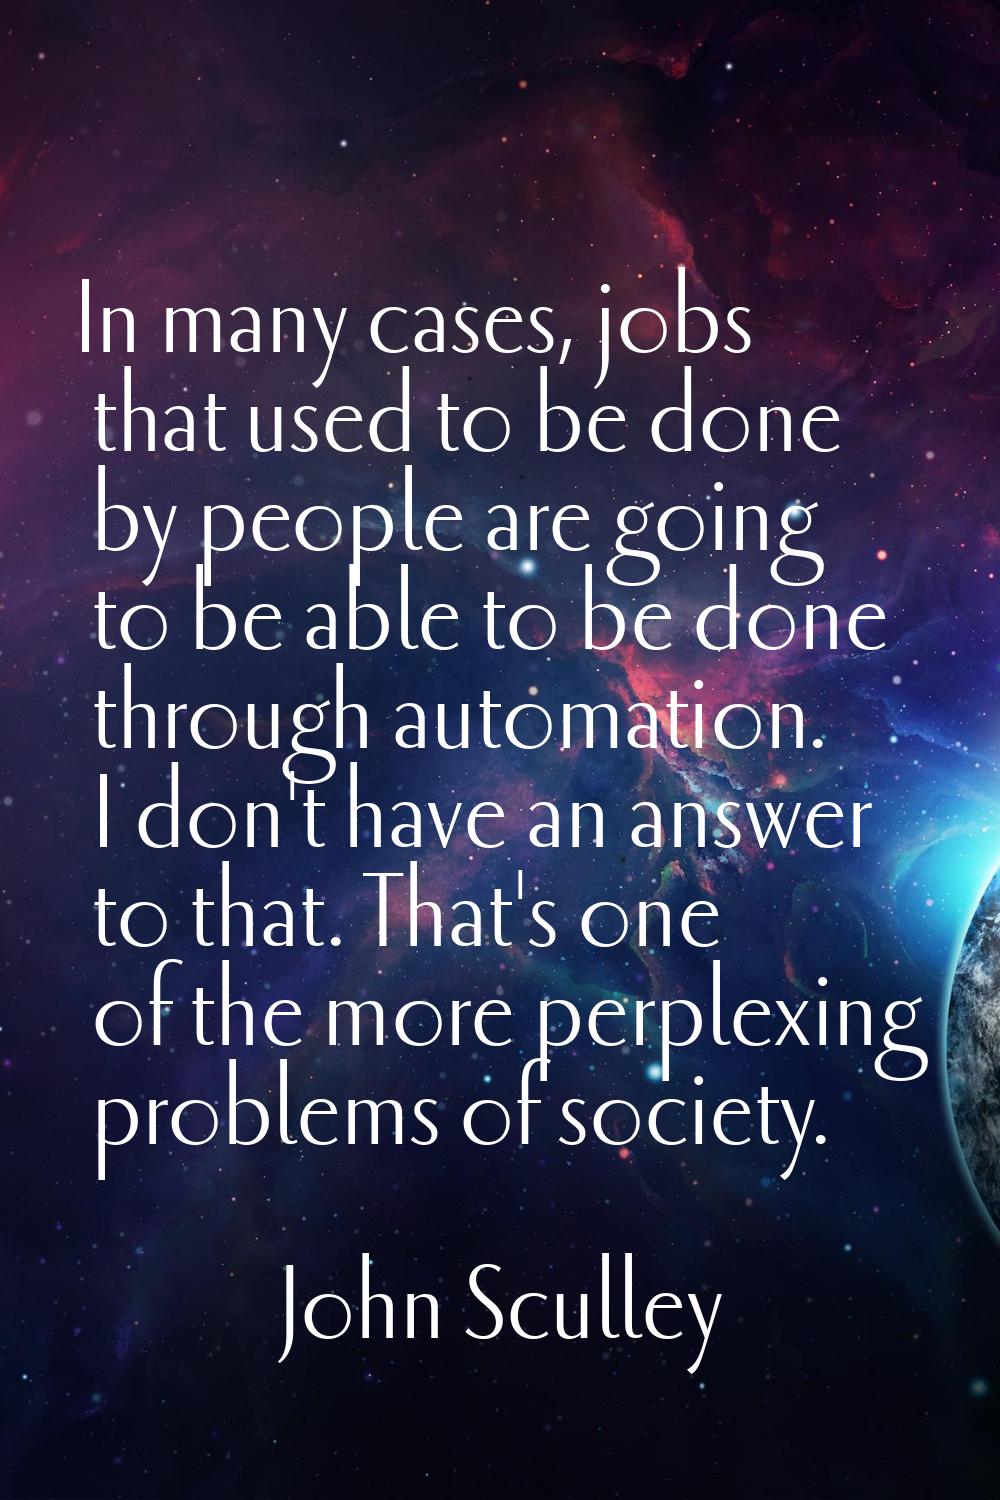 In many cases, jobs that used to be done by people are going to be able to be done through automati